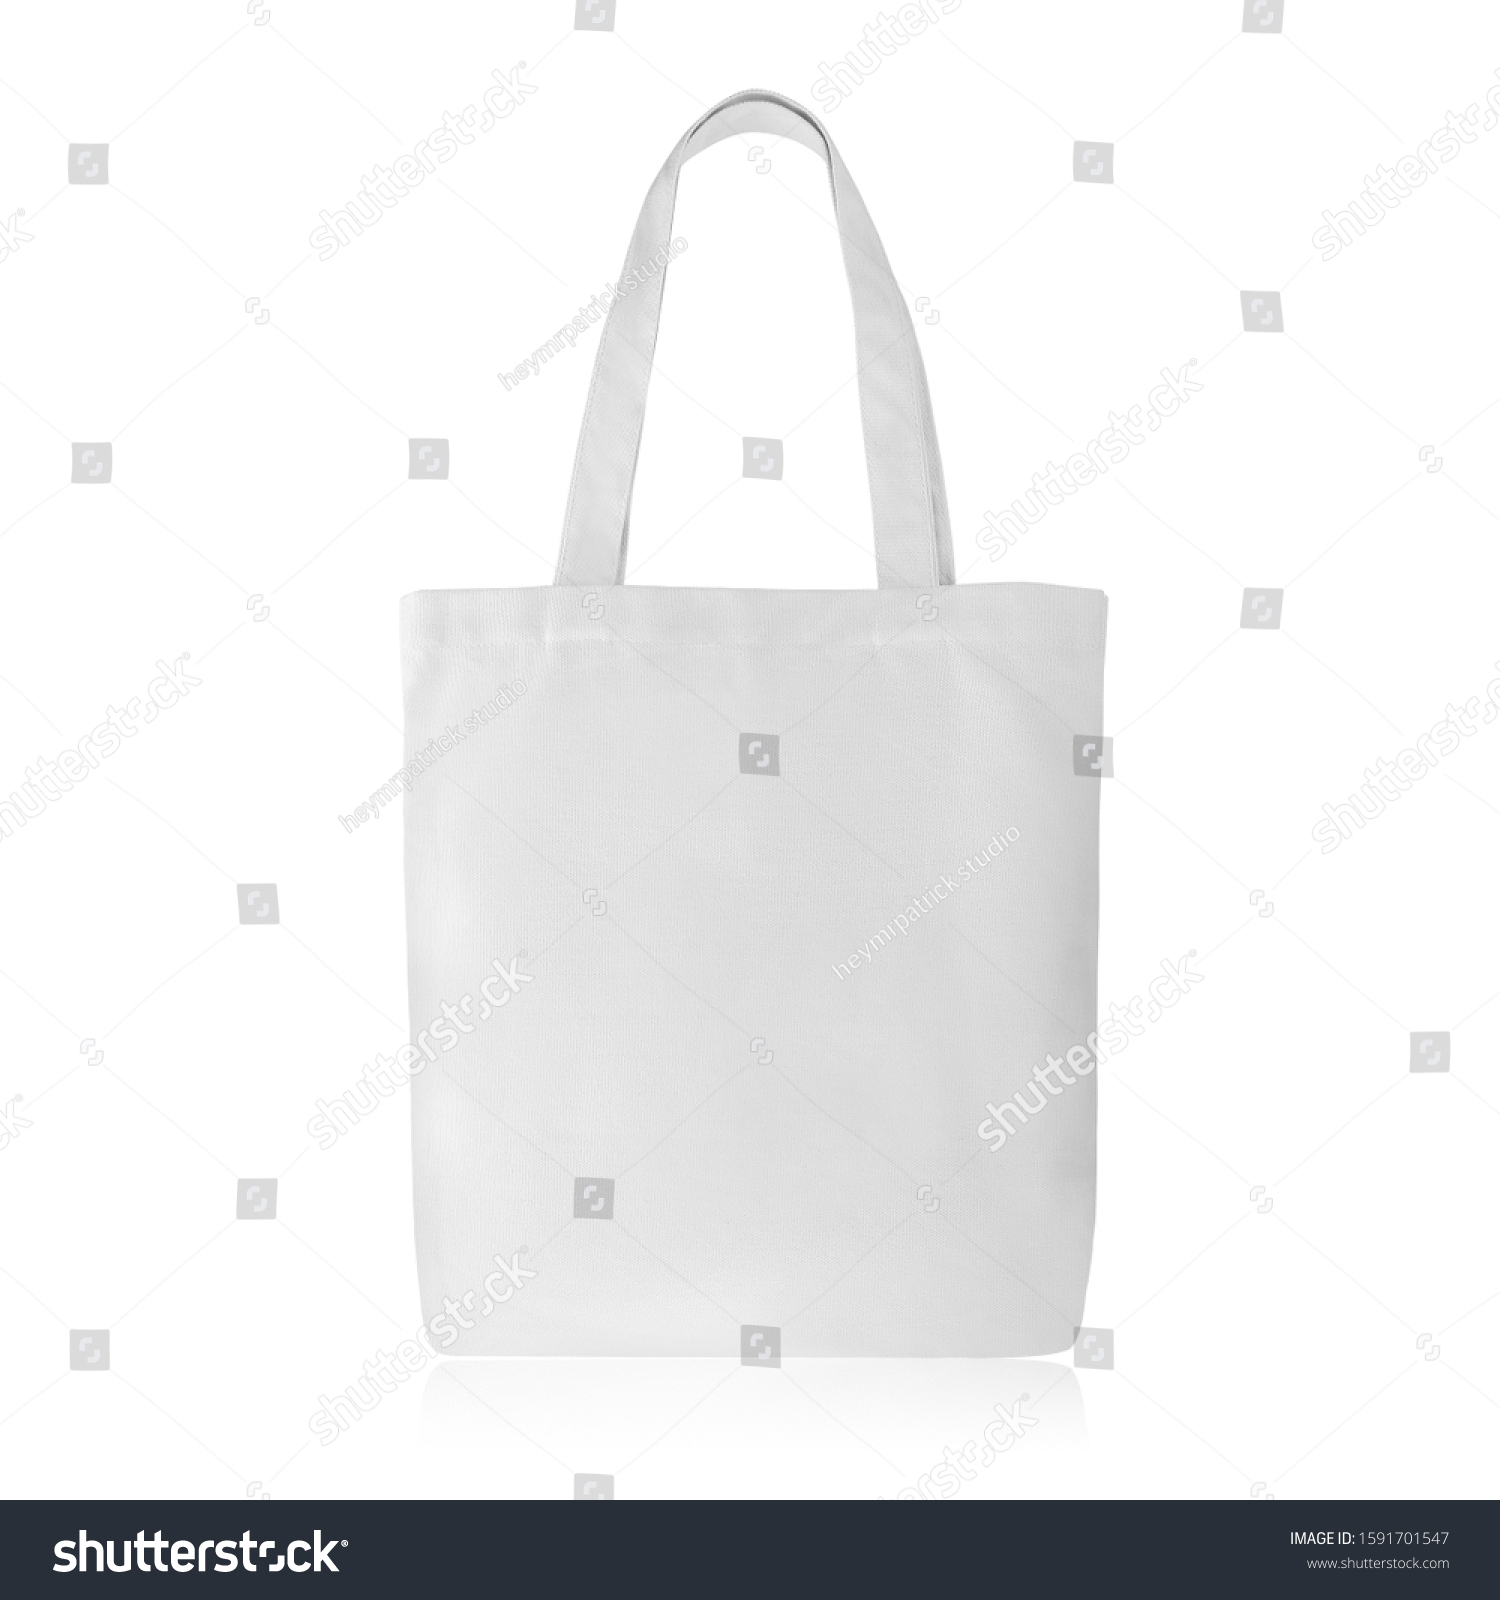 Natural White Linen Fabric Fashion Cotton & Eco Friendly Tote Bag Isolated on White Background. Reusable Blank Canvas Bag for Groceries and Shopping. Design Template for Mock up. No People #1591701547